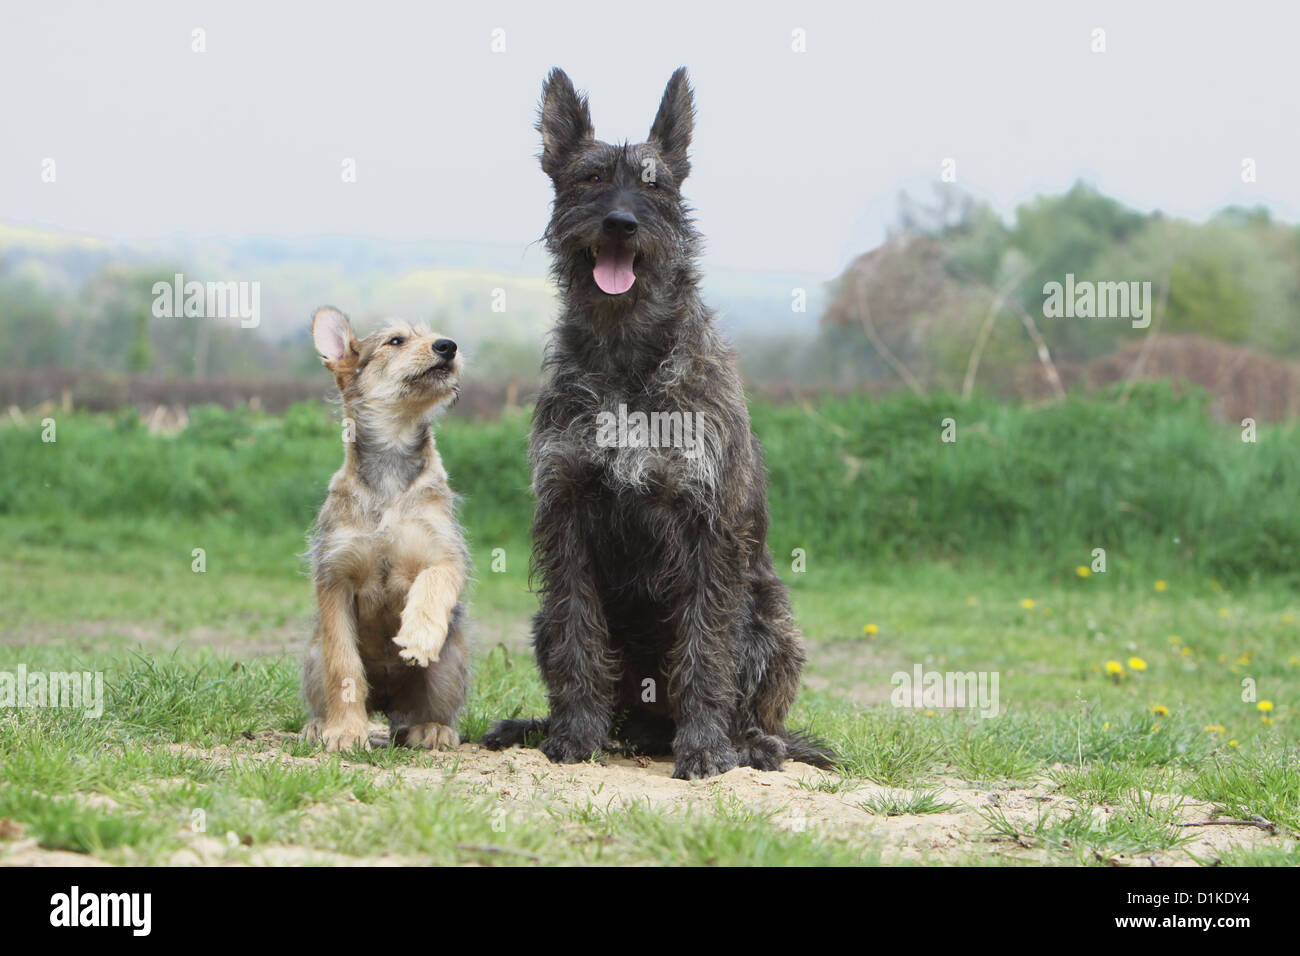 Dog Berger Picard /  Picardy Shepherd adult and puppy sitting Stock Photo